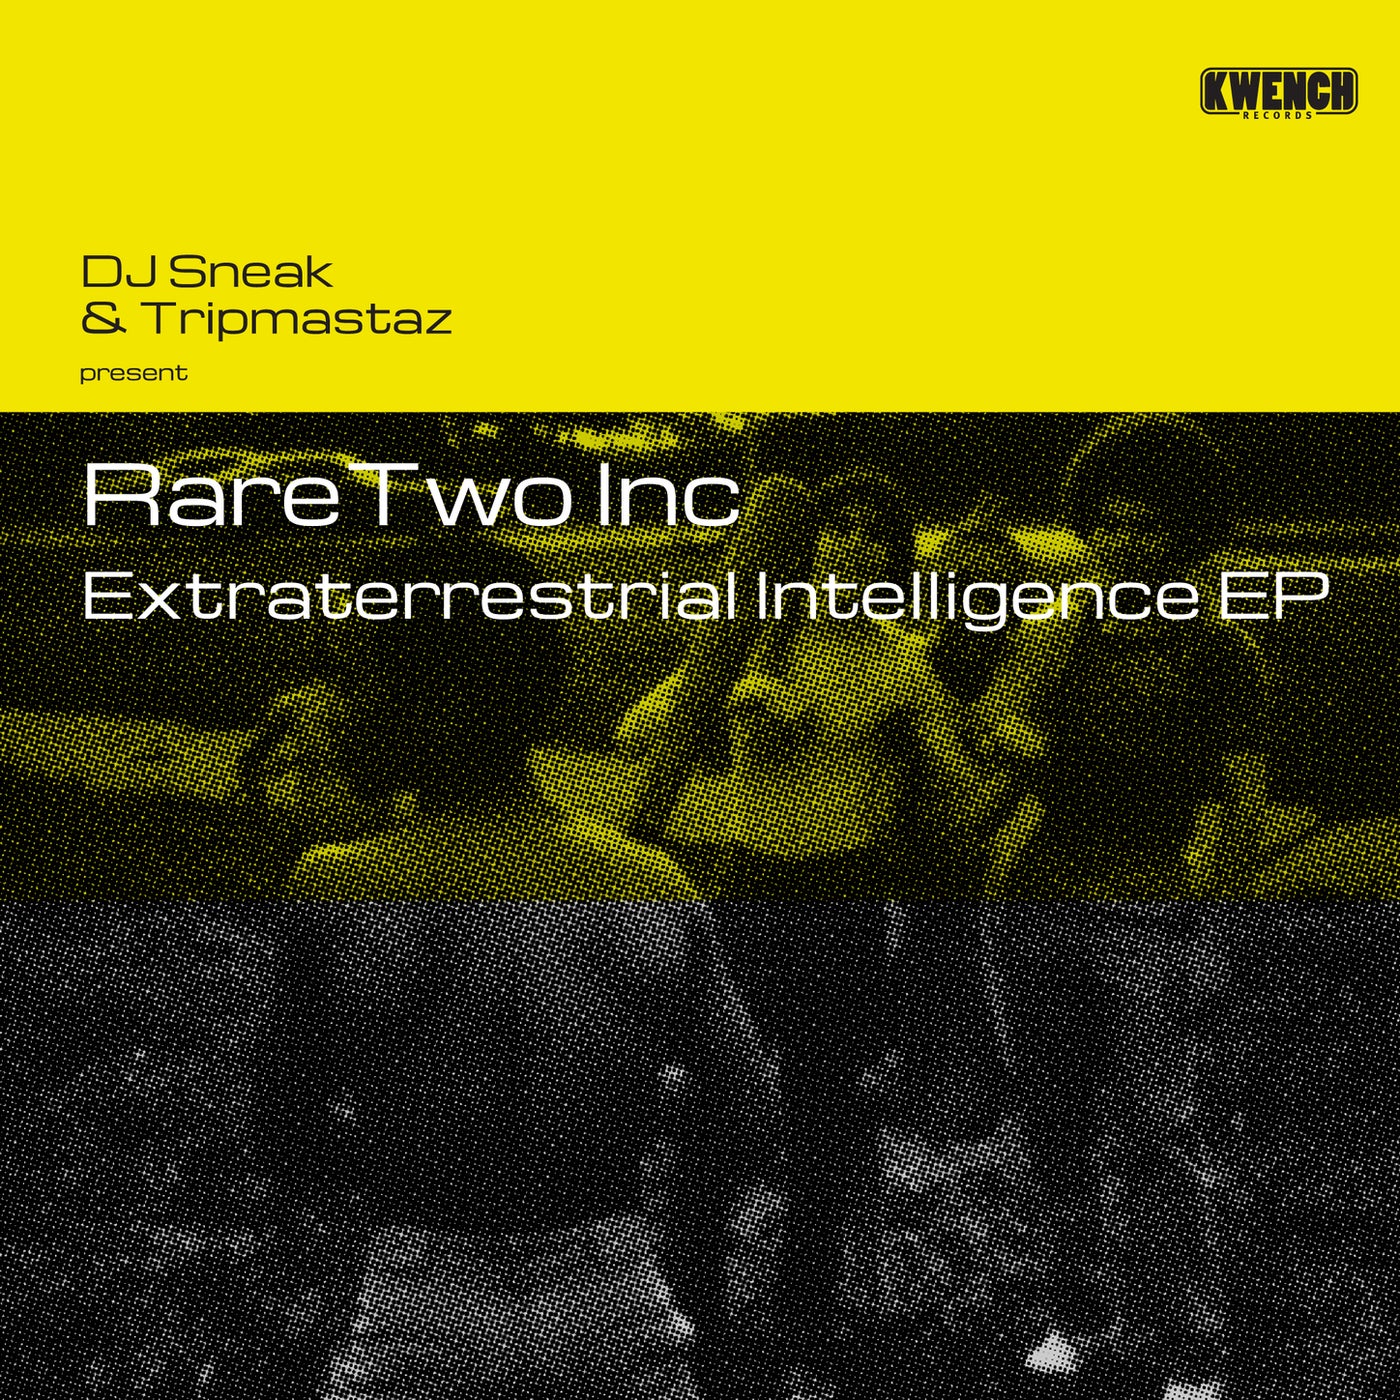 Extraterrestrial Intelligence EP